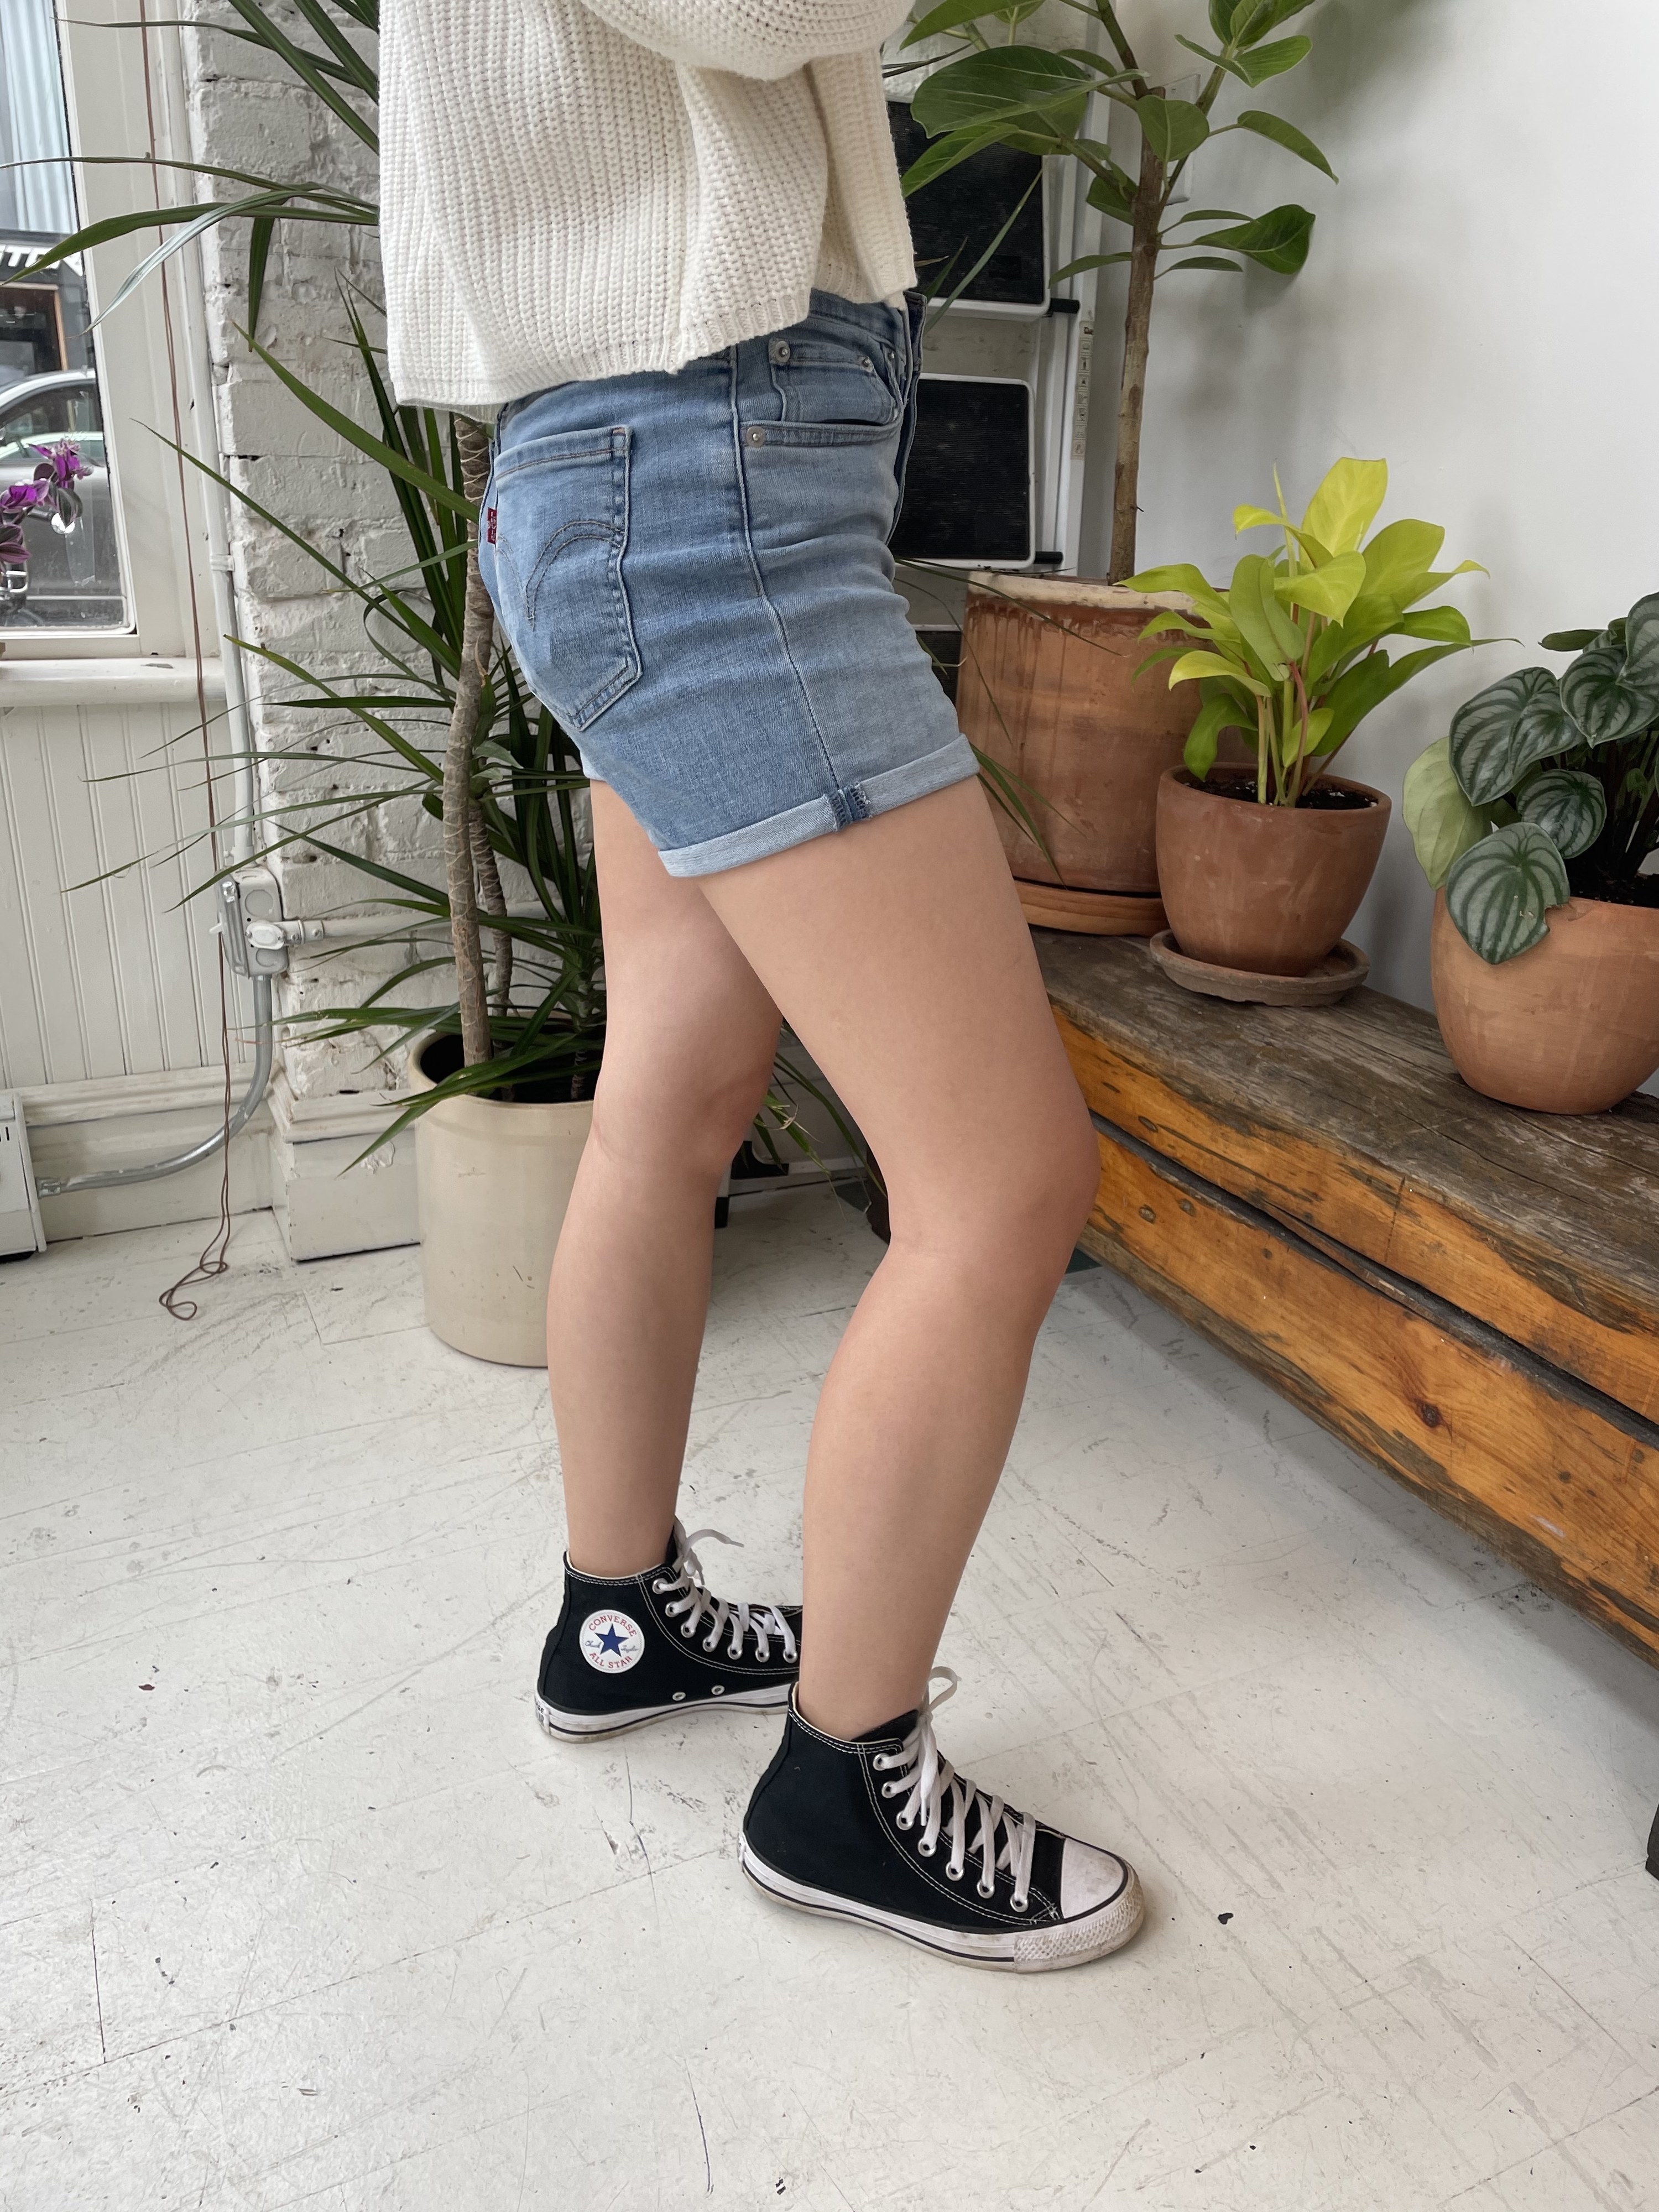 writer wearing the shorts with hi-top black converse, plants in the background